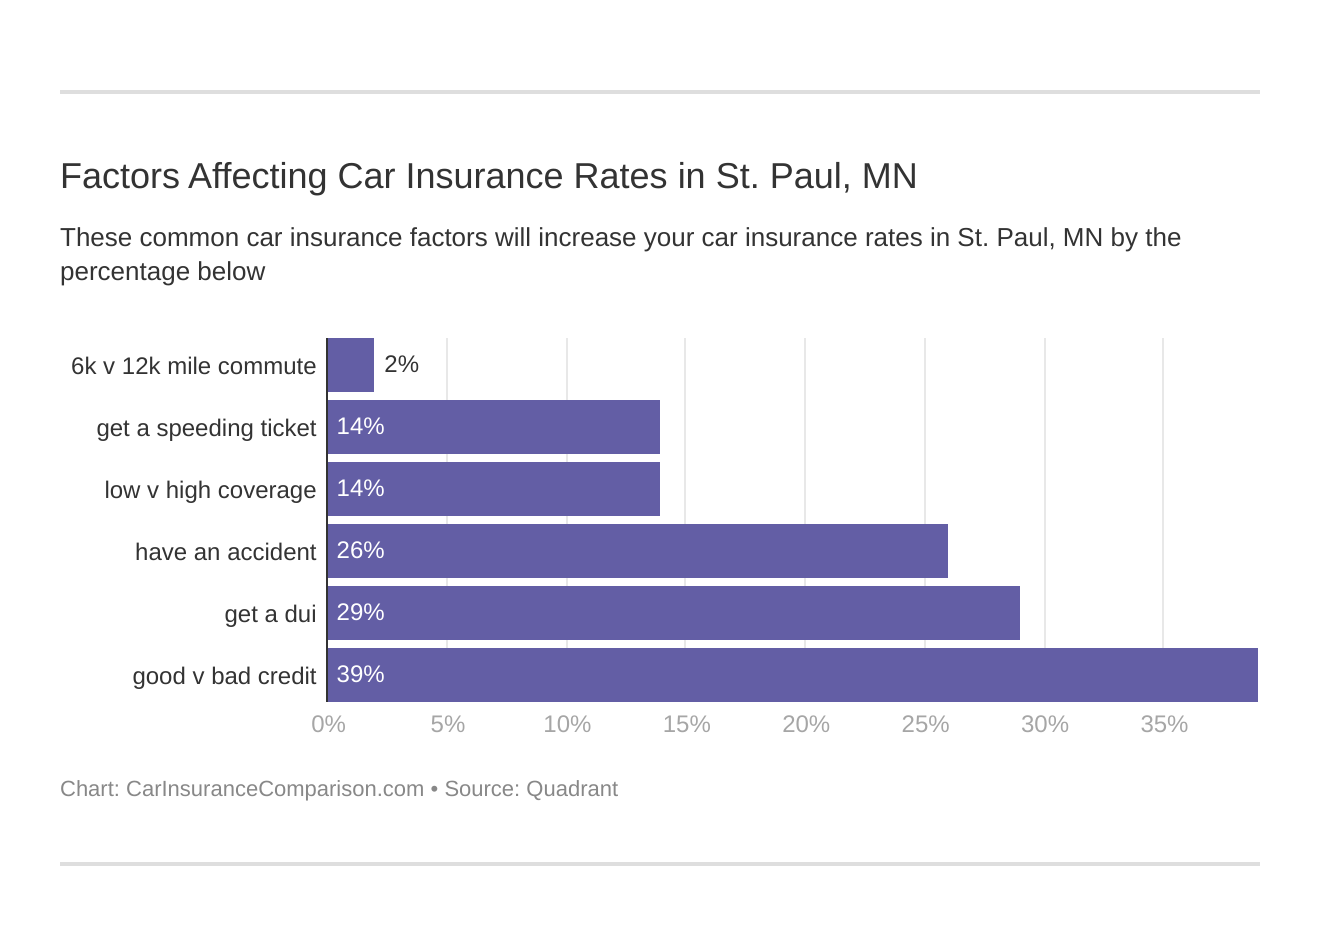 Factors Affecting Car Insurance Rates in St. Paul, MN